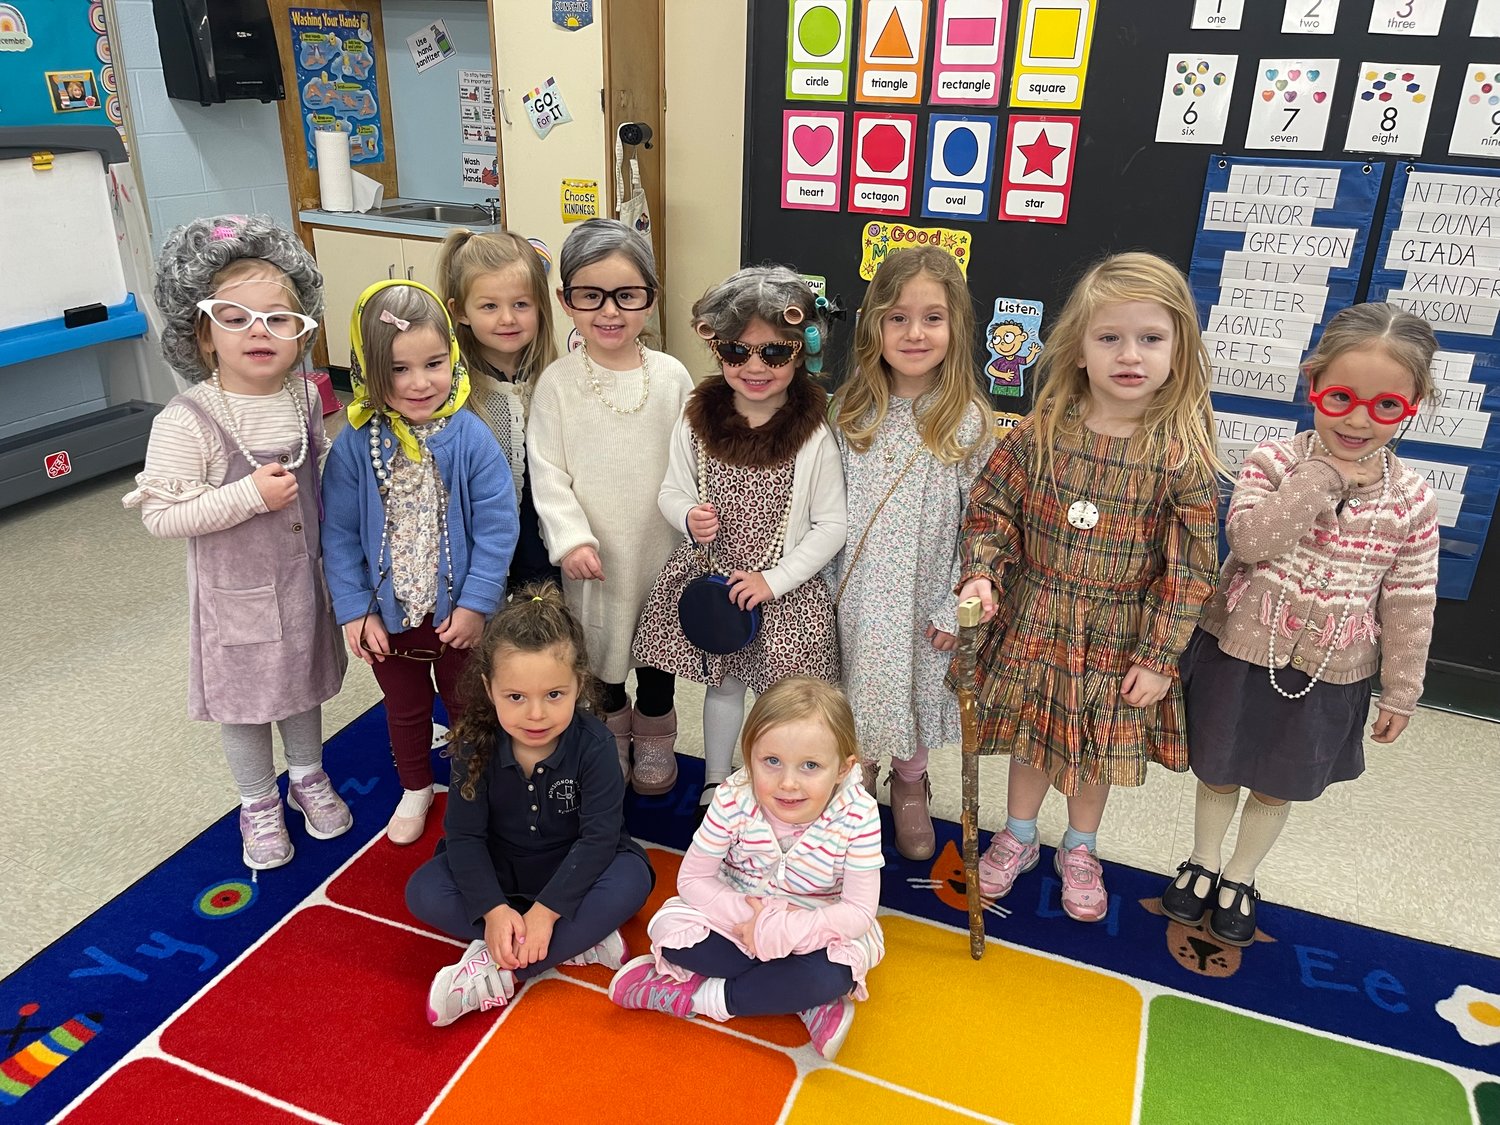 Pictured are children from the Pre-K3 class.